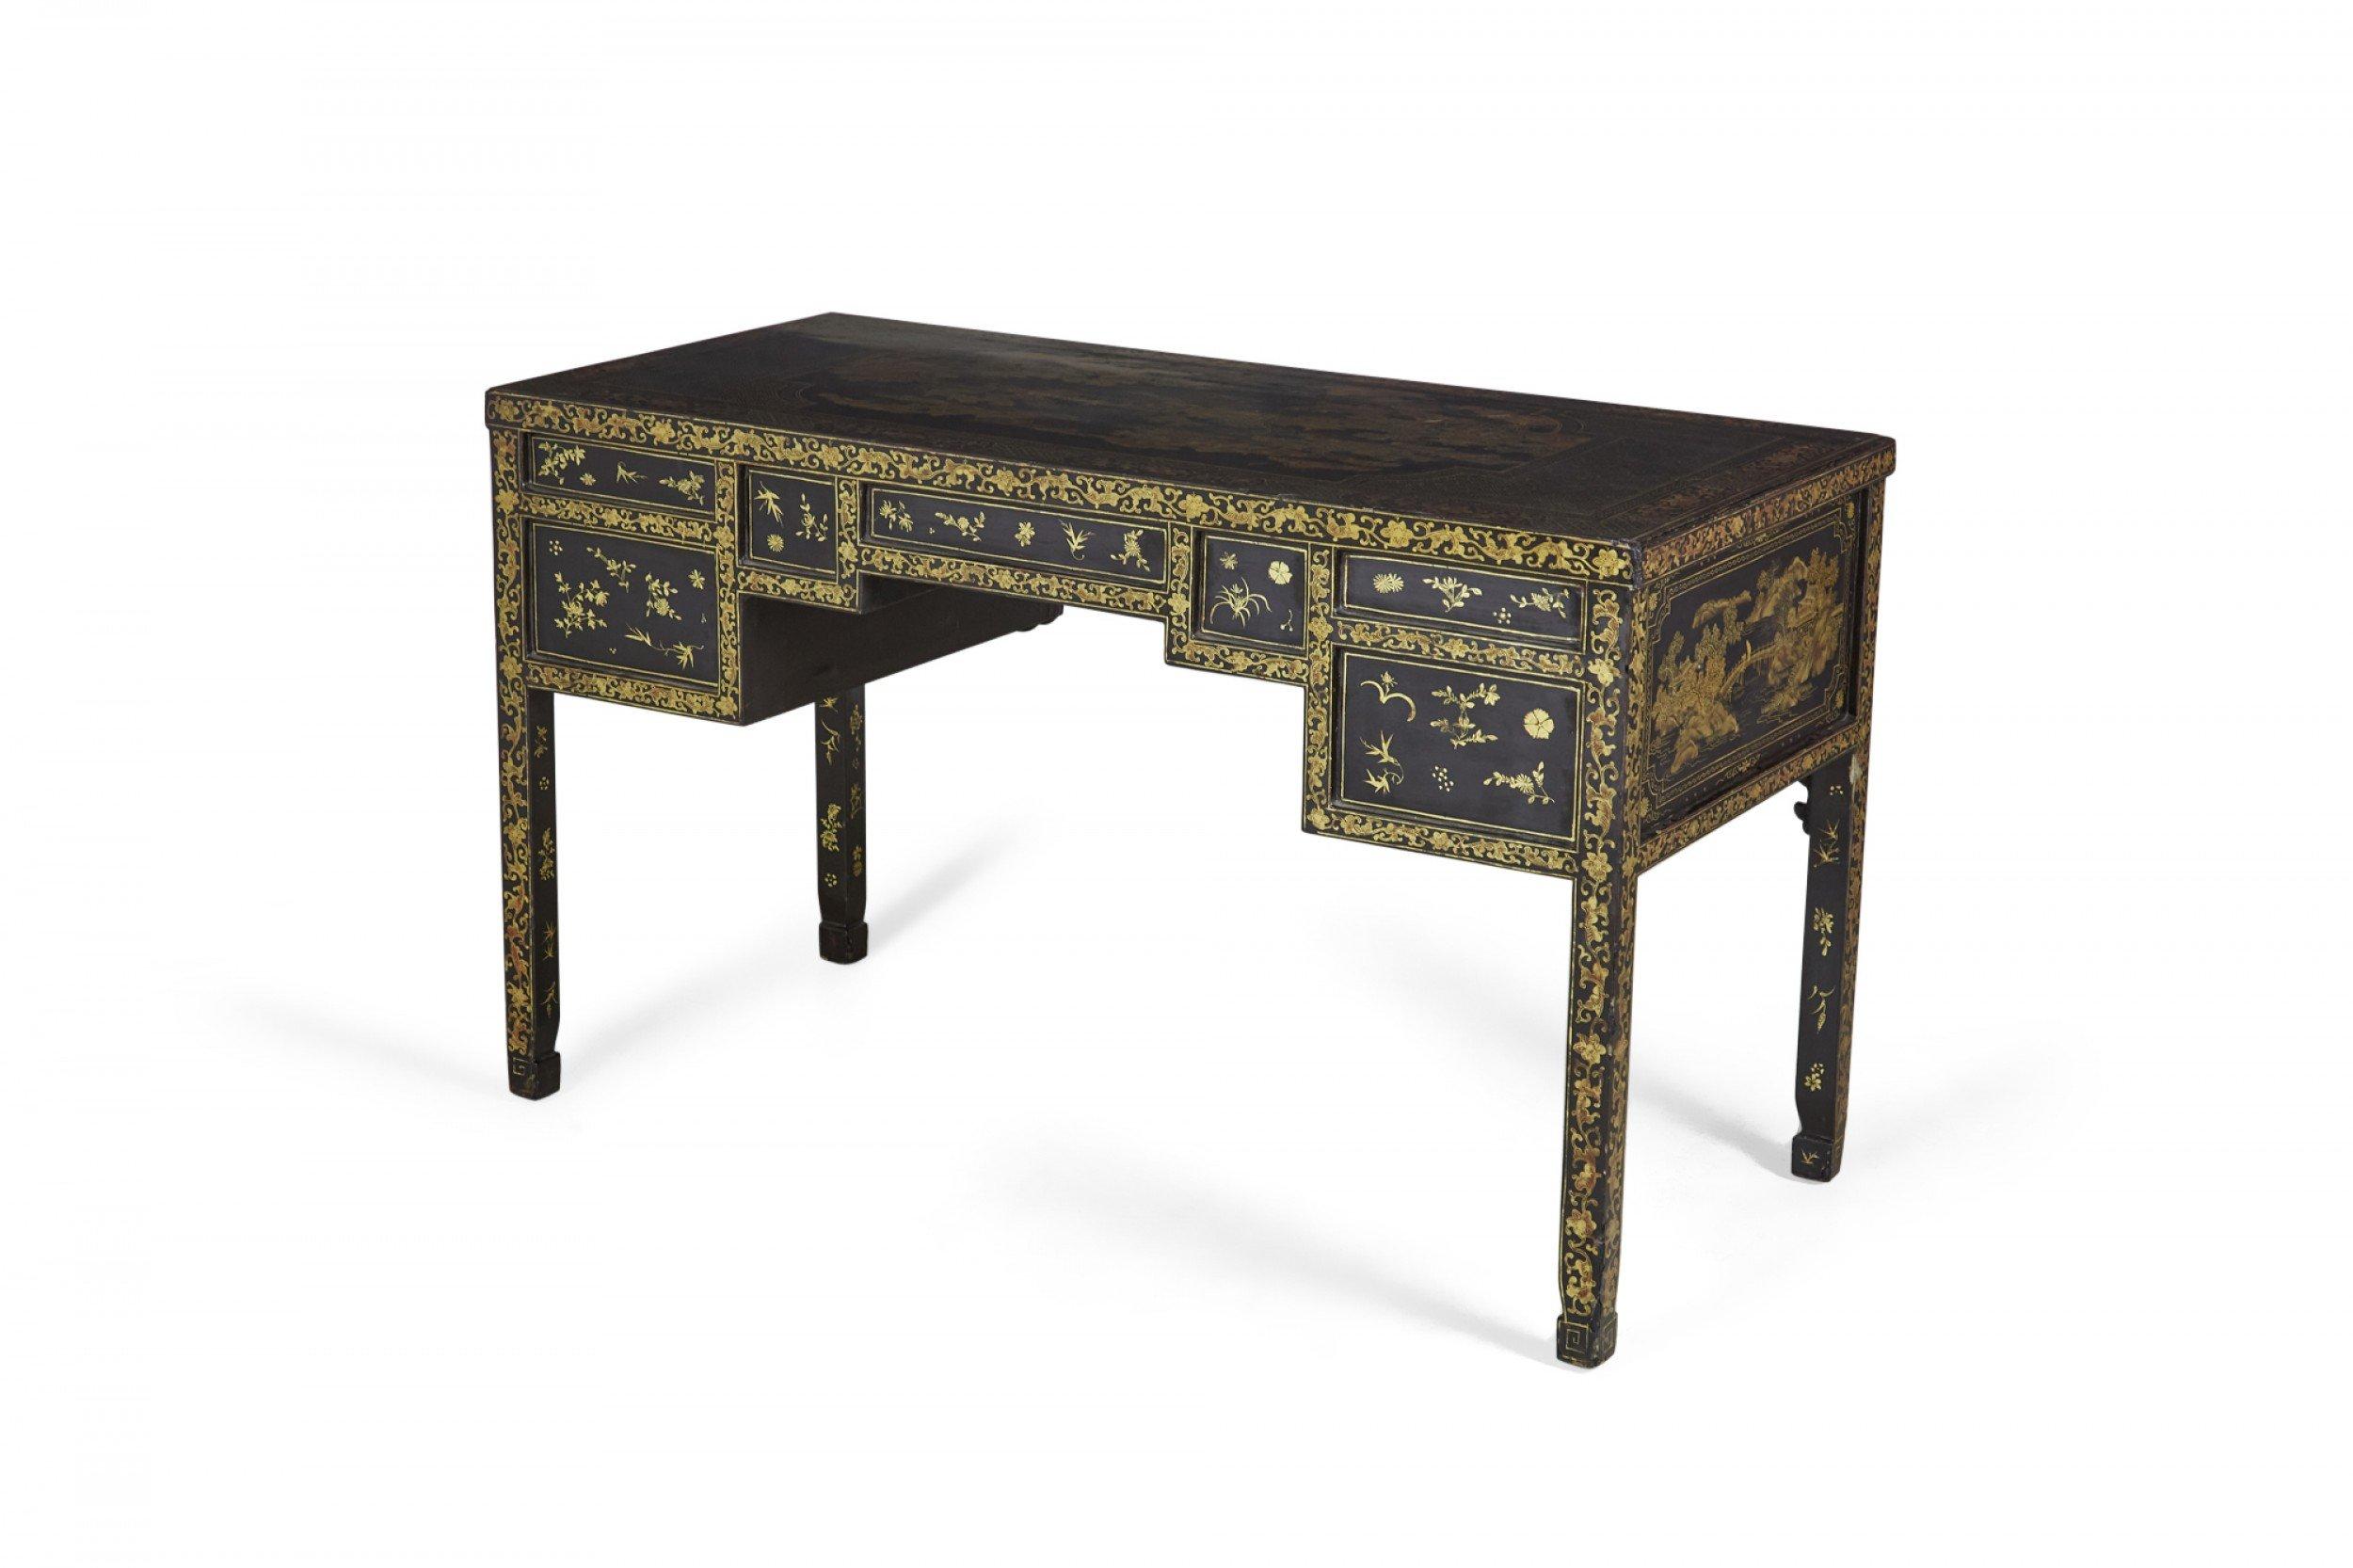 19th Century English Regency Chinese Export Gilt Black Lacquer Desk For Sale 2